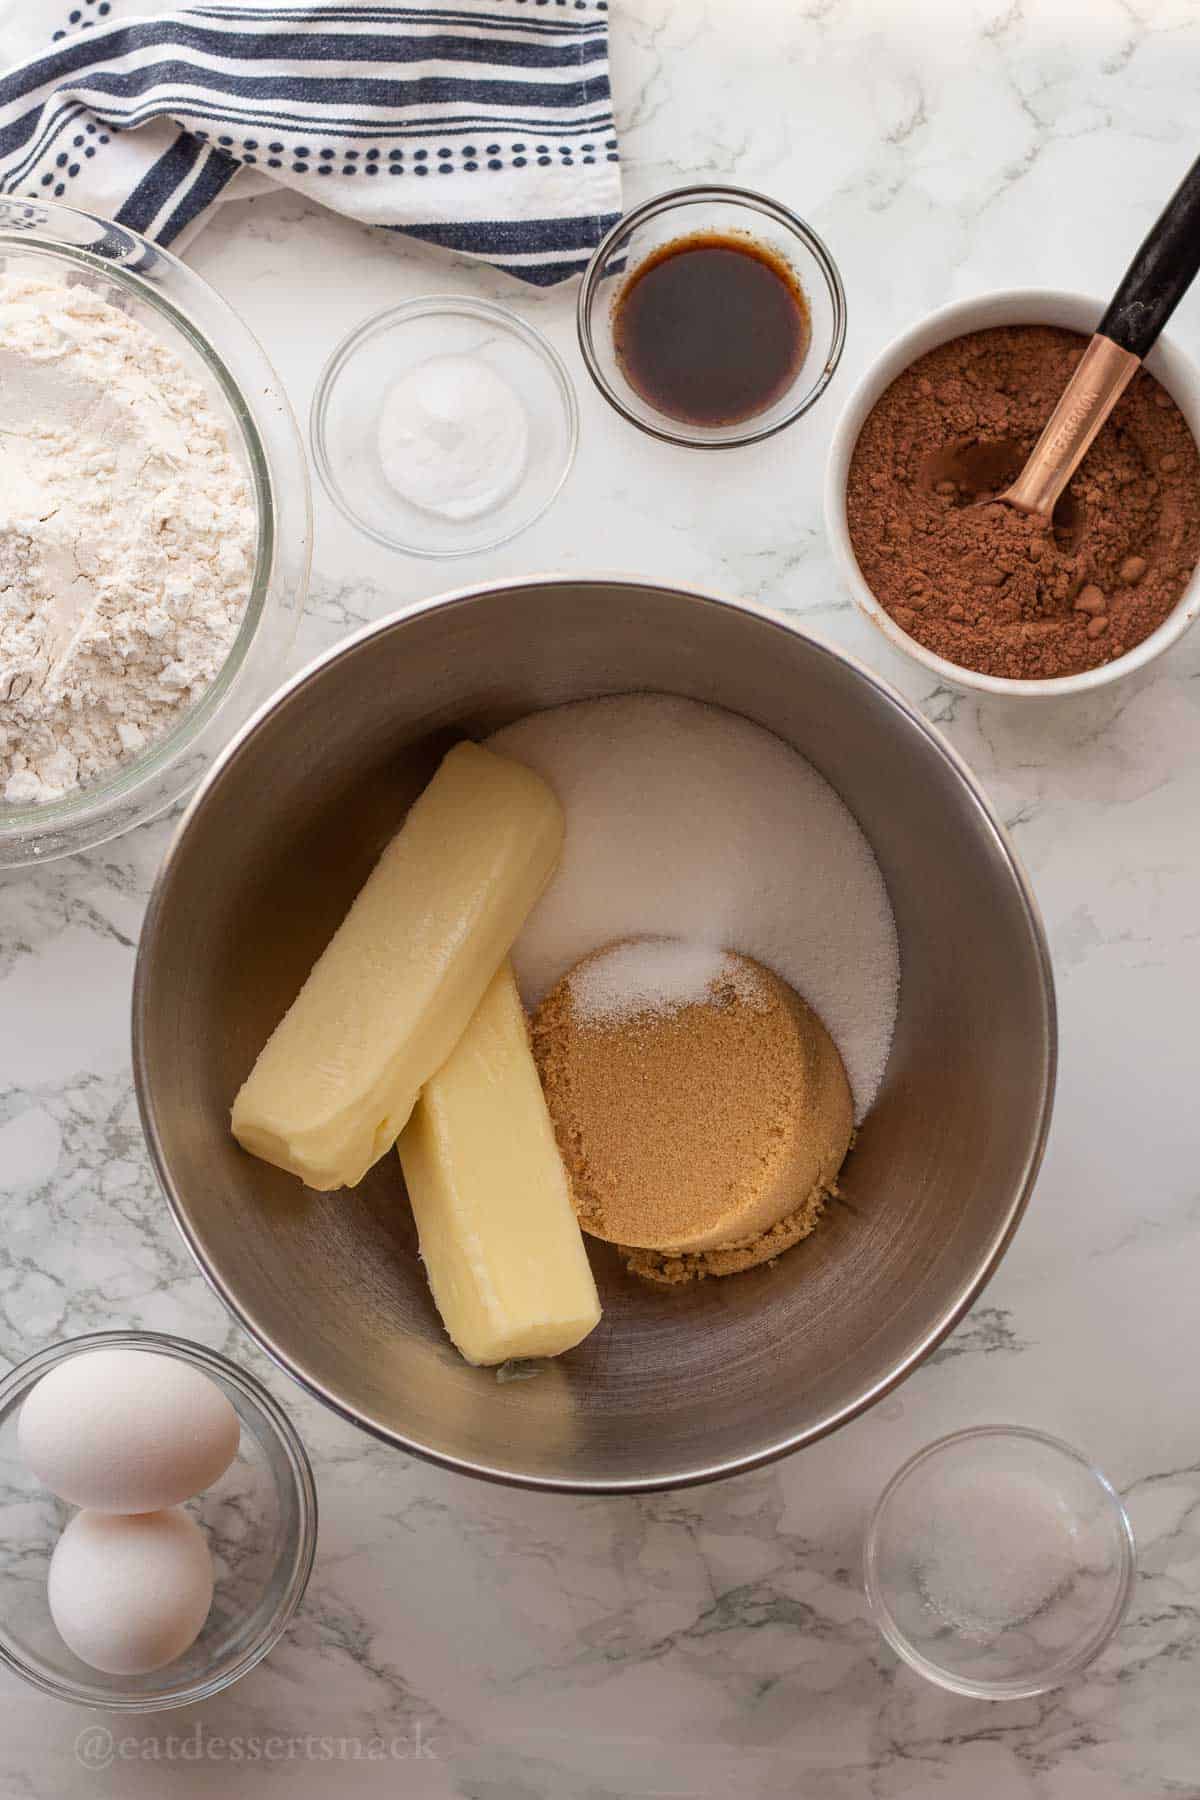 Butter, brown sugar, and white sugar in metal bowl with other ingredients nearby in glass bowls.